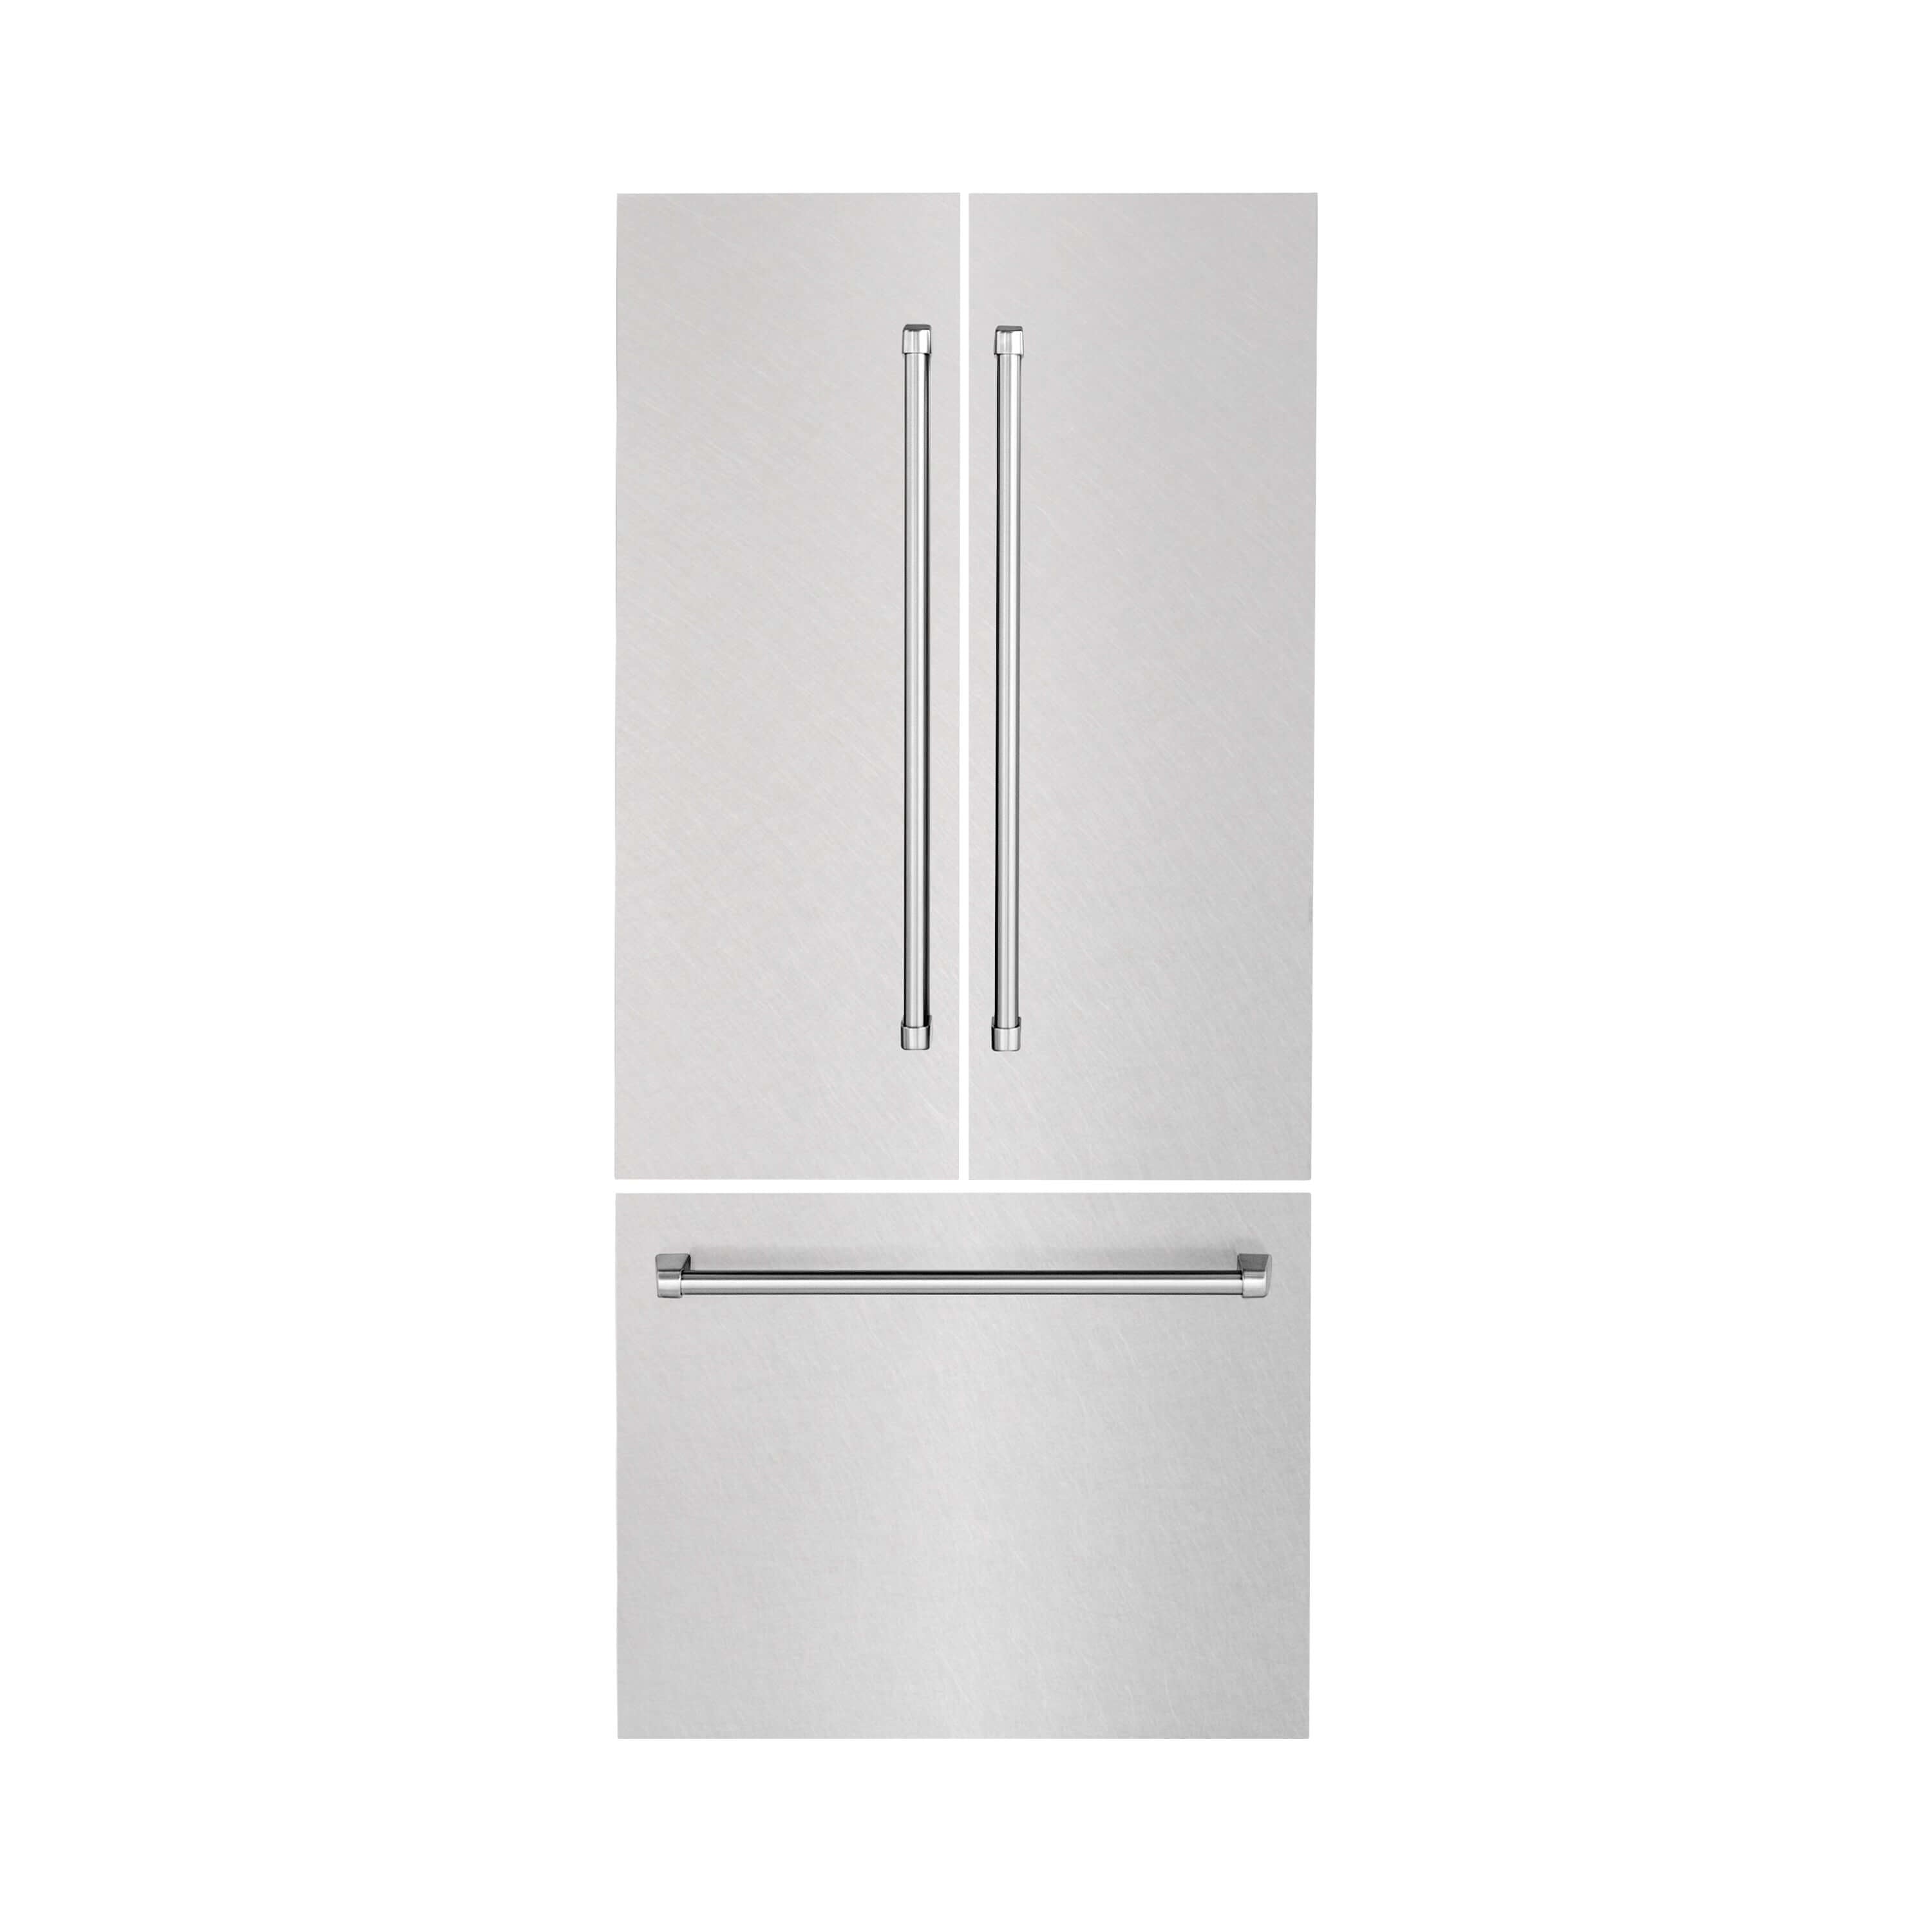 Panels & Handles Only- ZLINE 36 in. Refrigerator Panels in Fingerprint Resistant Stainless Steel for a 36 in. Built-in Refrigerator (RPBIV-SN-36)